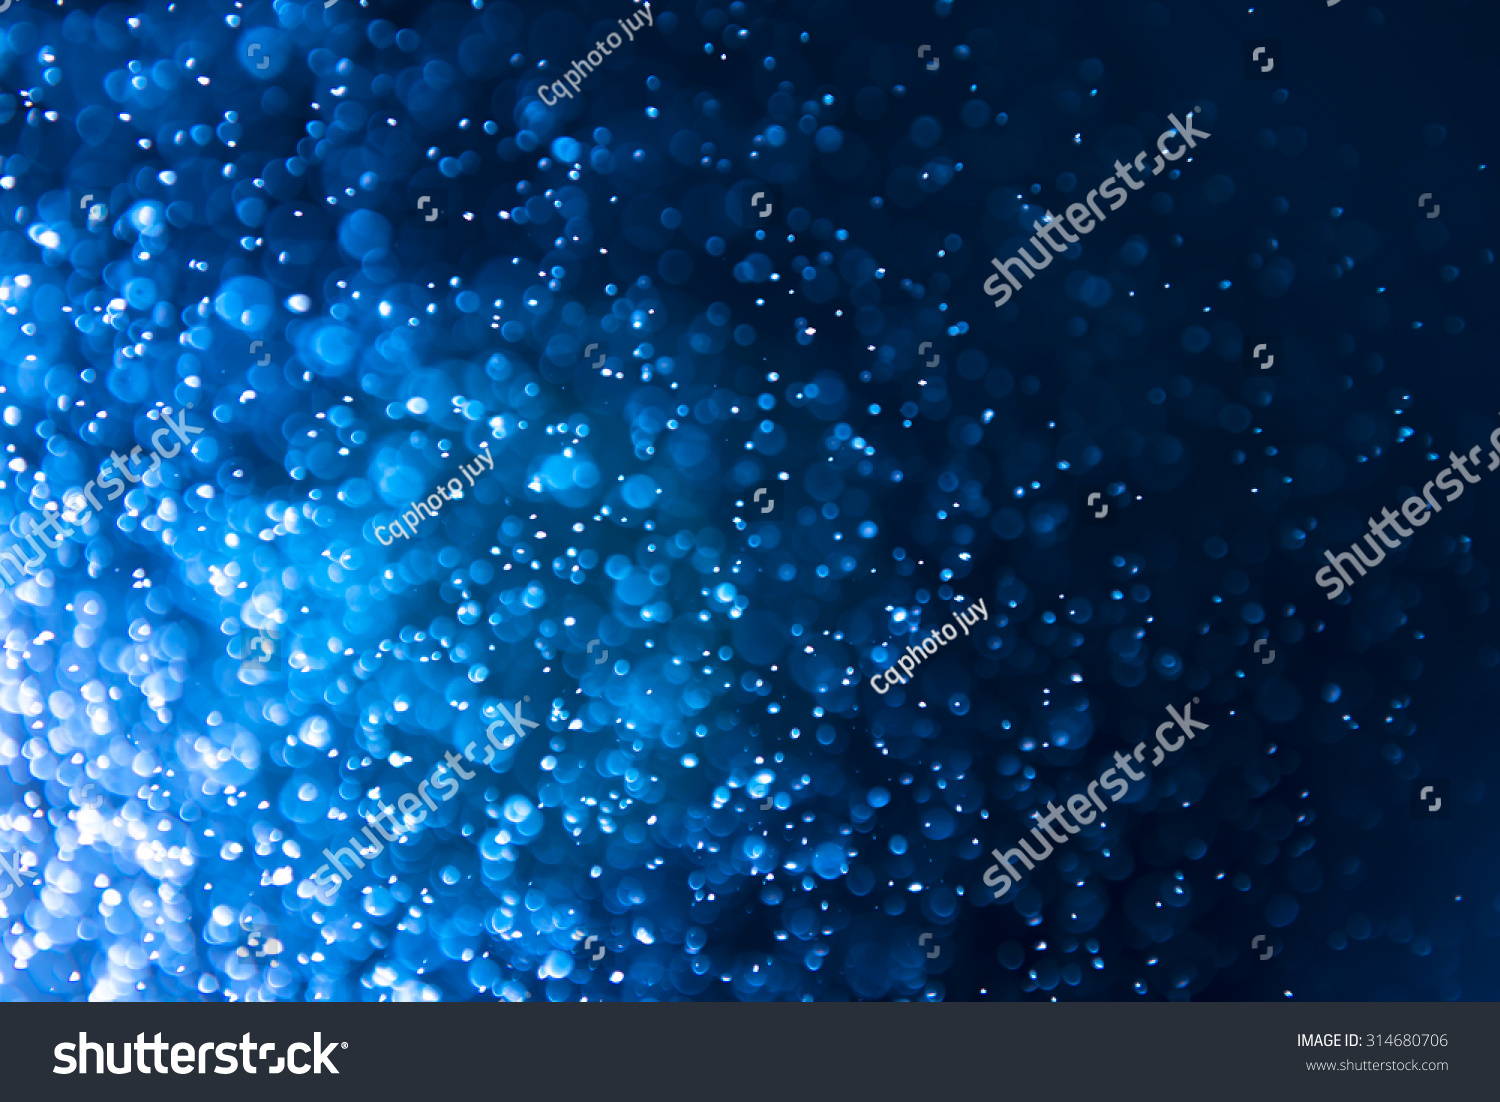 Abstract bokeh background #314680706